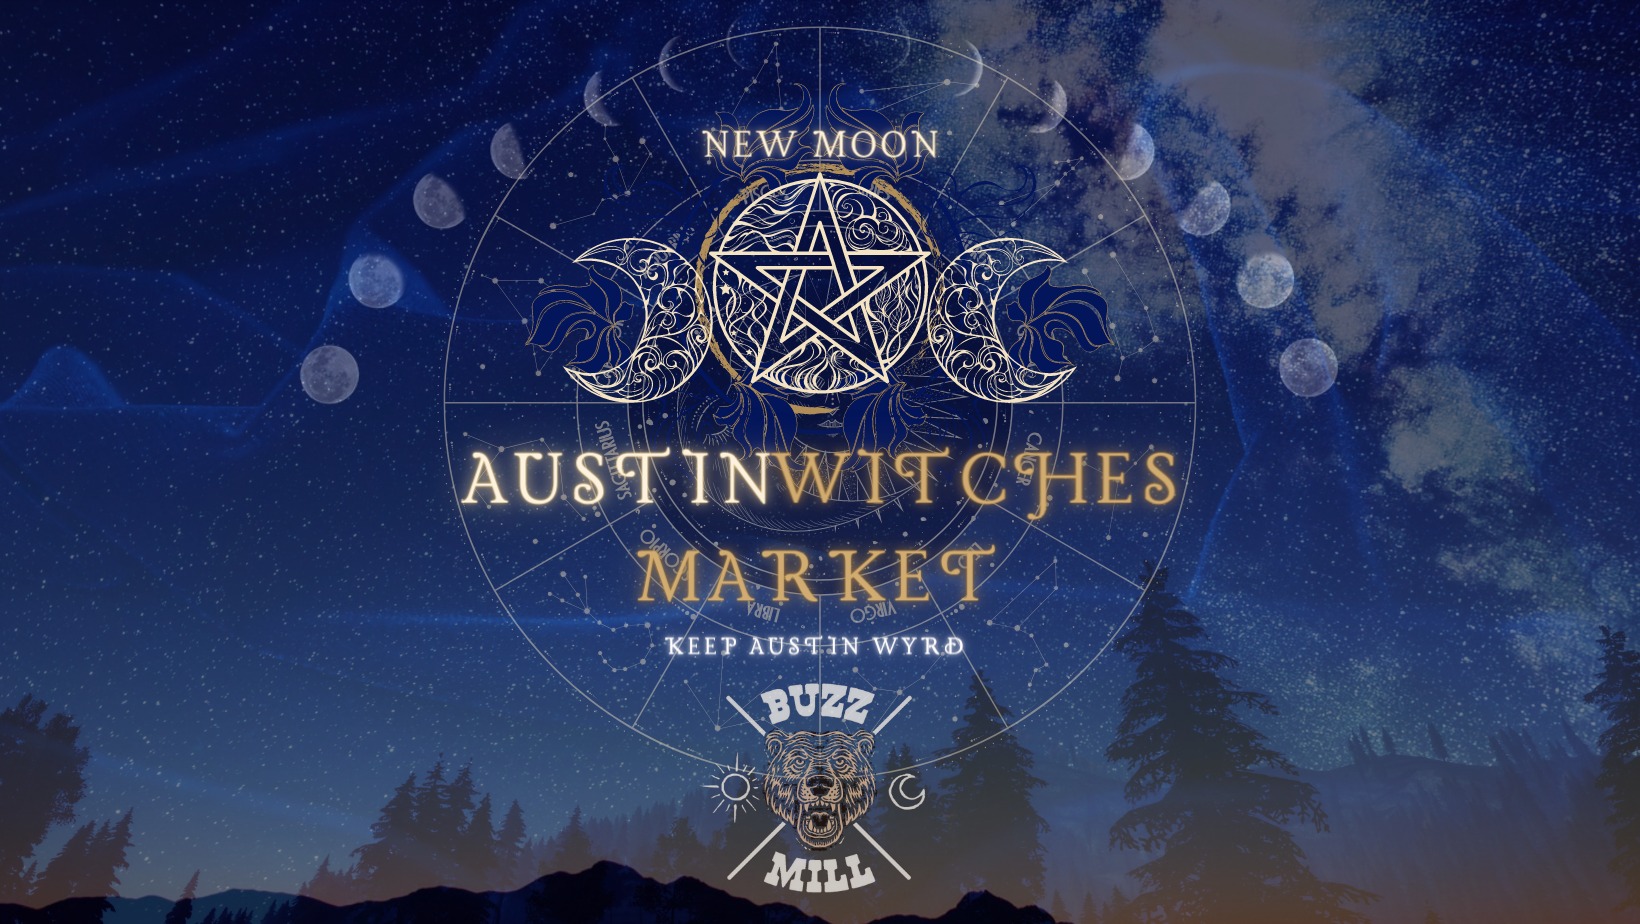 New Moon Witches Market at Buzz Mill